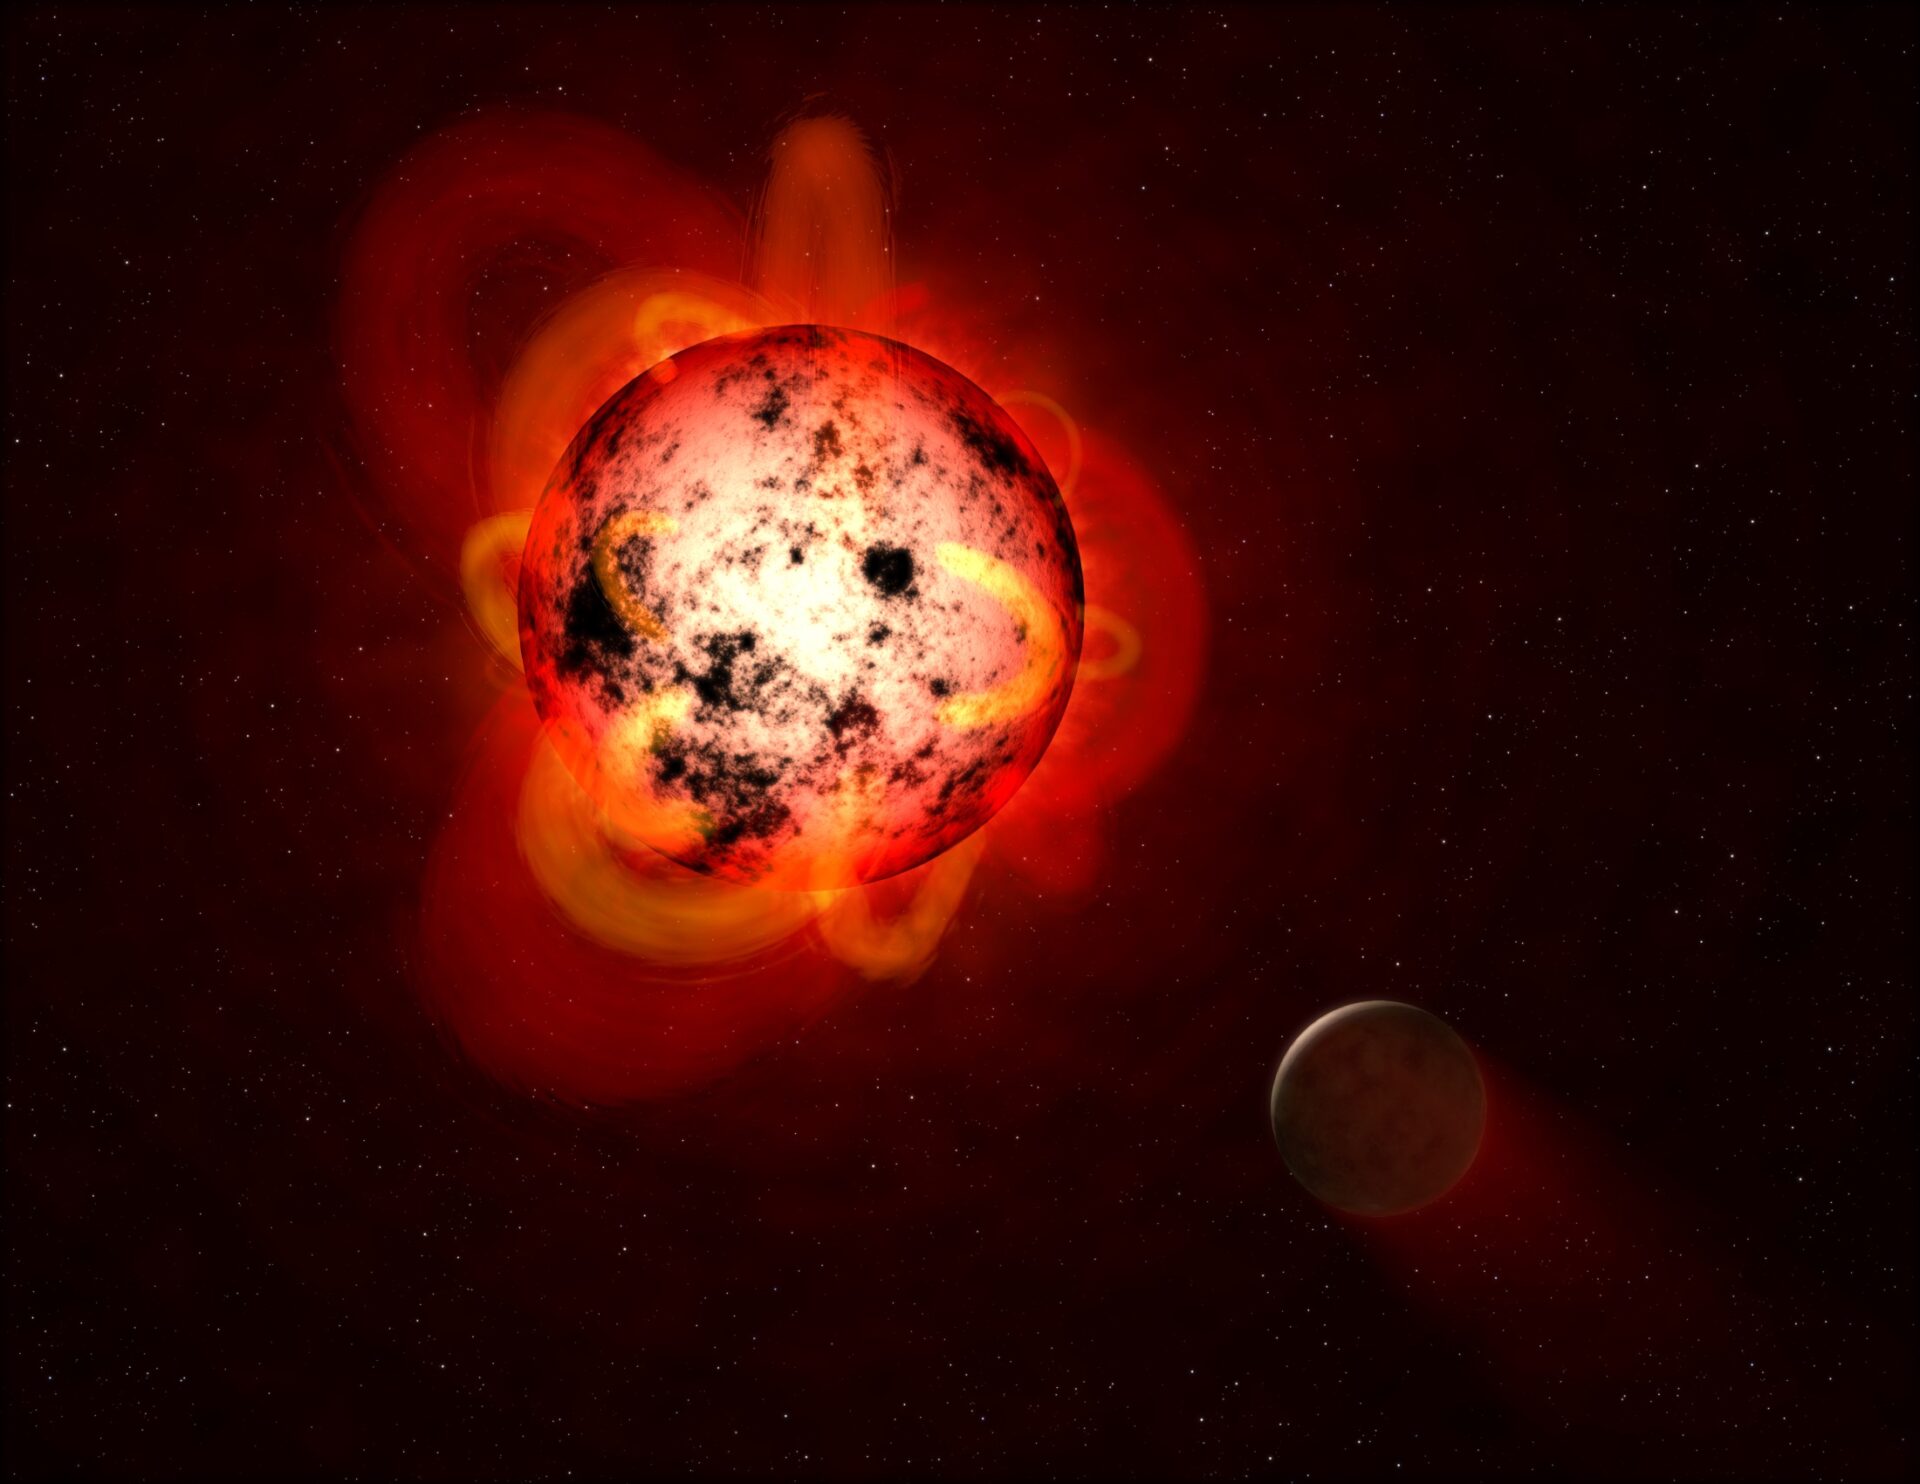 Two exoplanets have been found close to a red dwarf